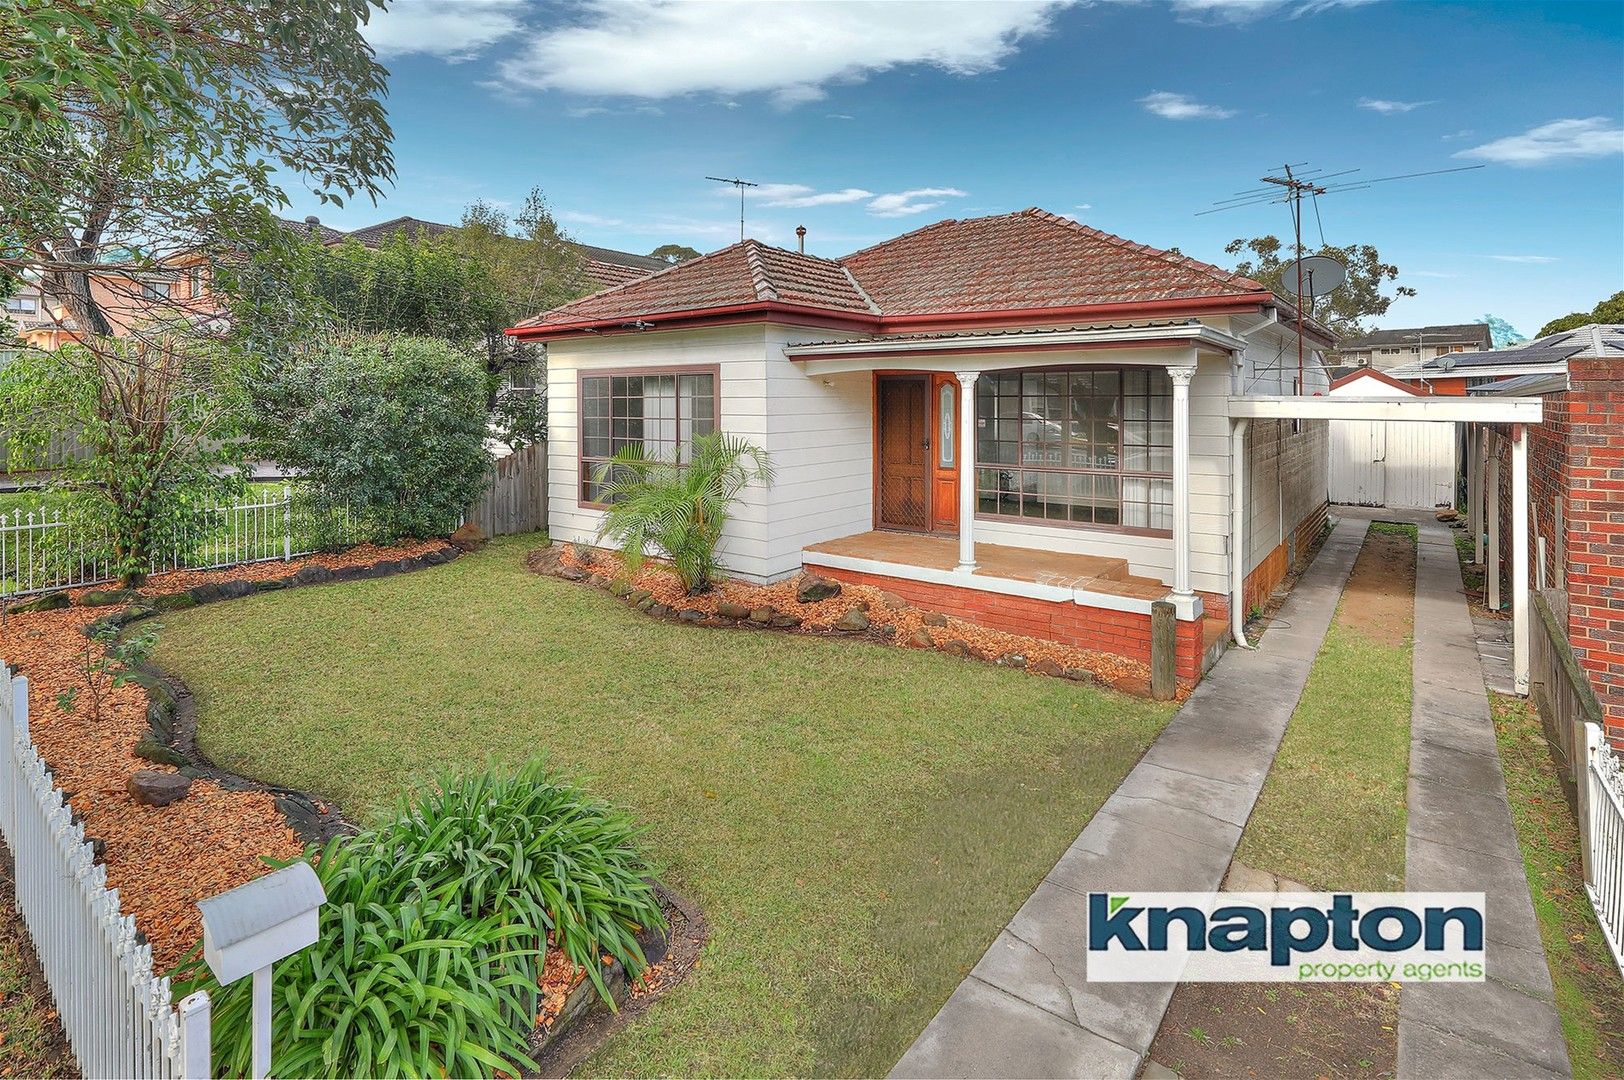 4 bedrooms House in 98 SHORTER AVENUE NARWEE NSW, 2209